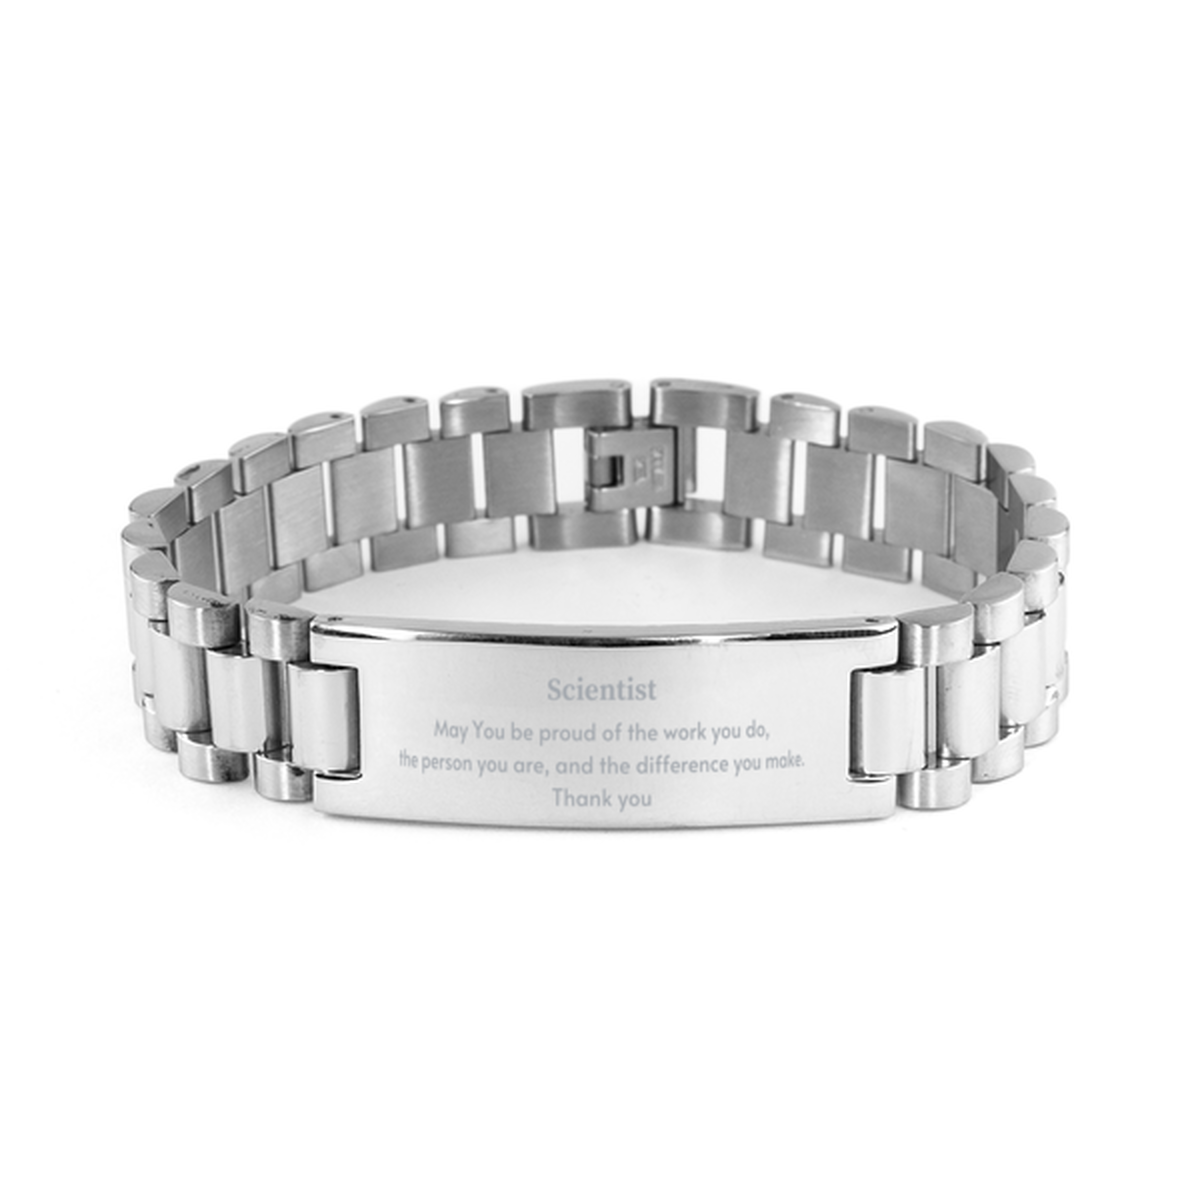 Heartwarming Ladder Stainless Steel Bracelet Retirement Coworkers Gifts for Scientist, Scientist May You be proud of the work you do, the person you are Gifts for Boss Men Women Friends